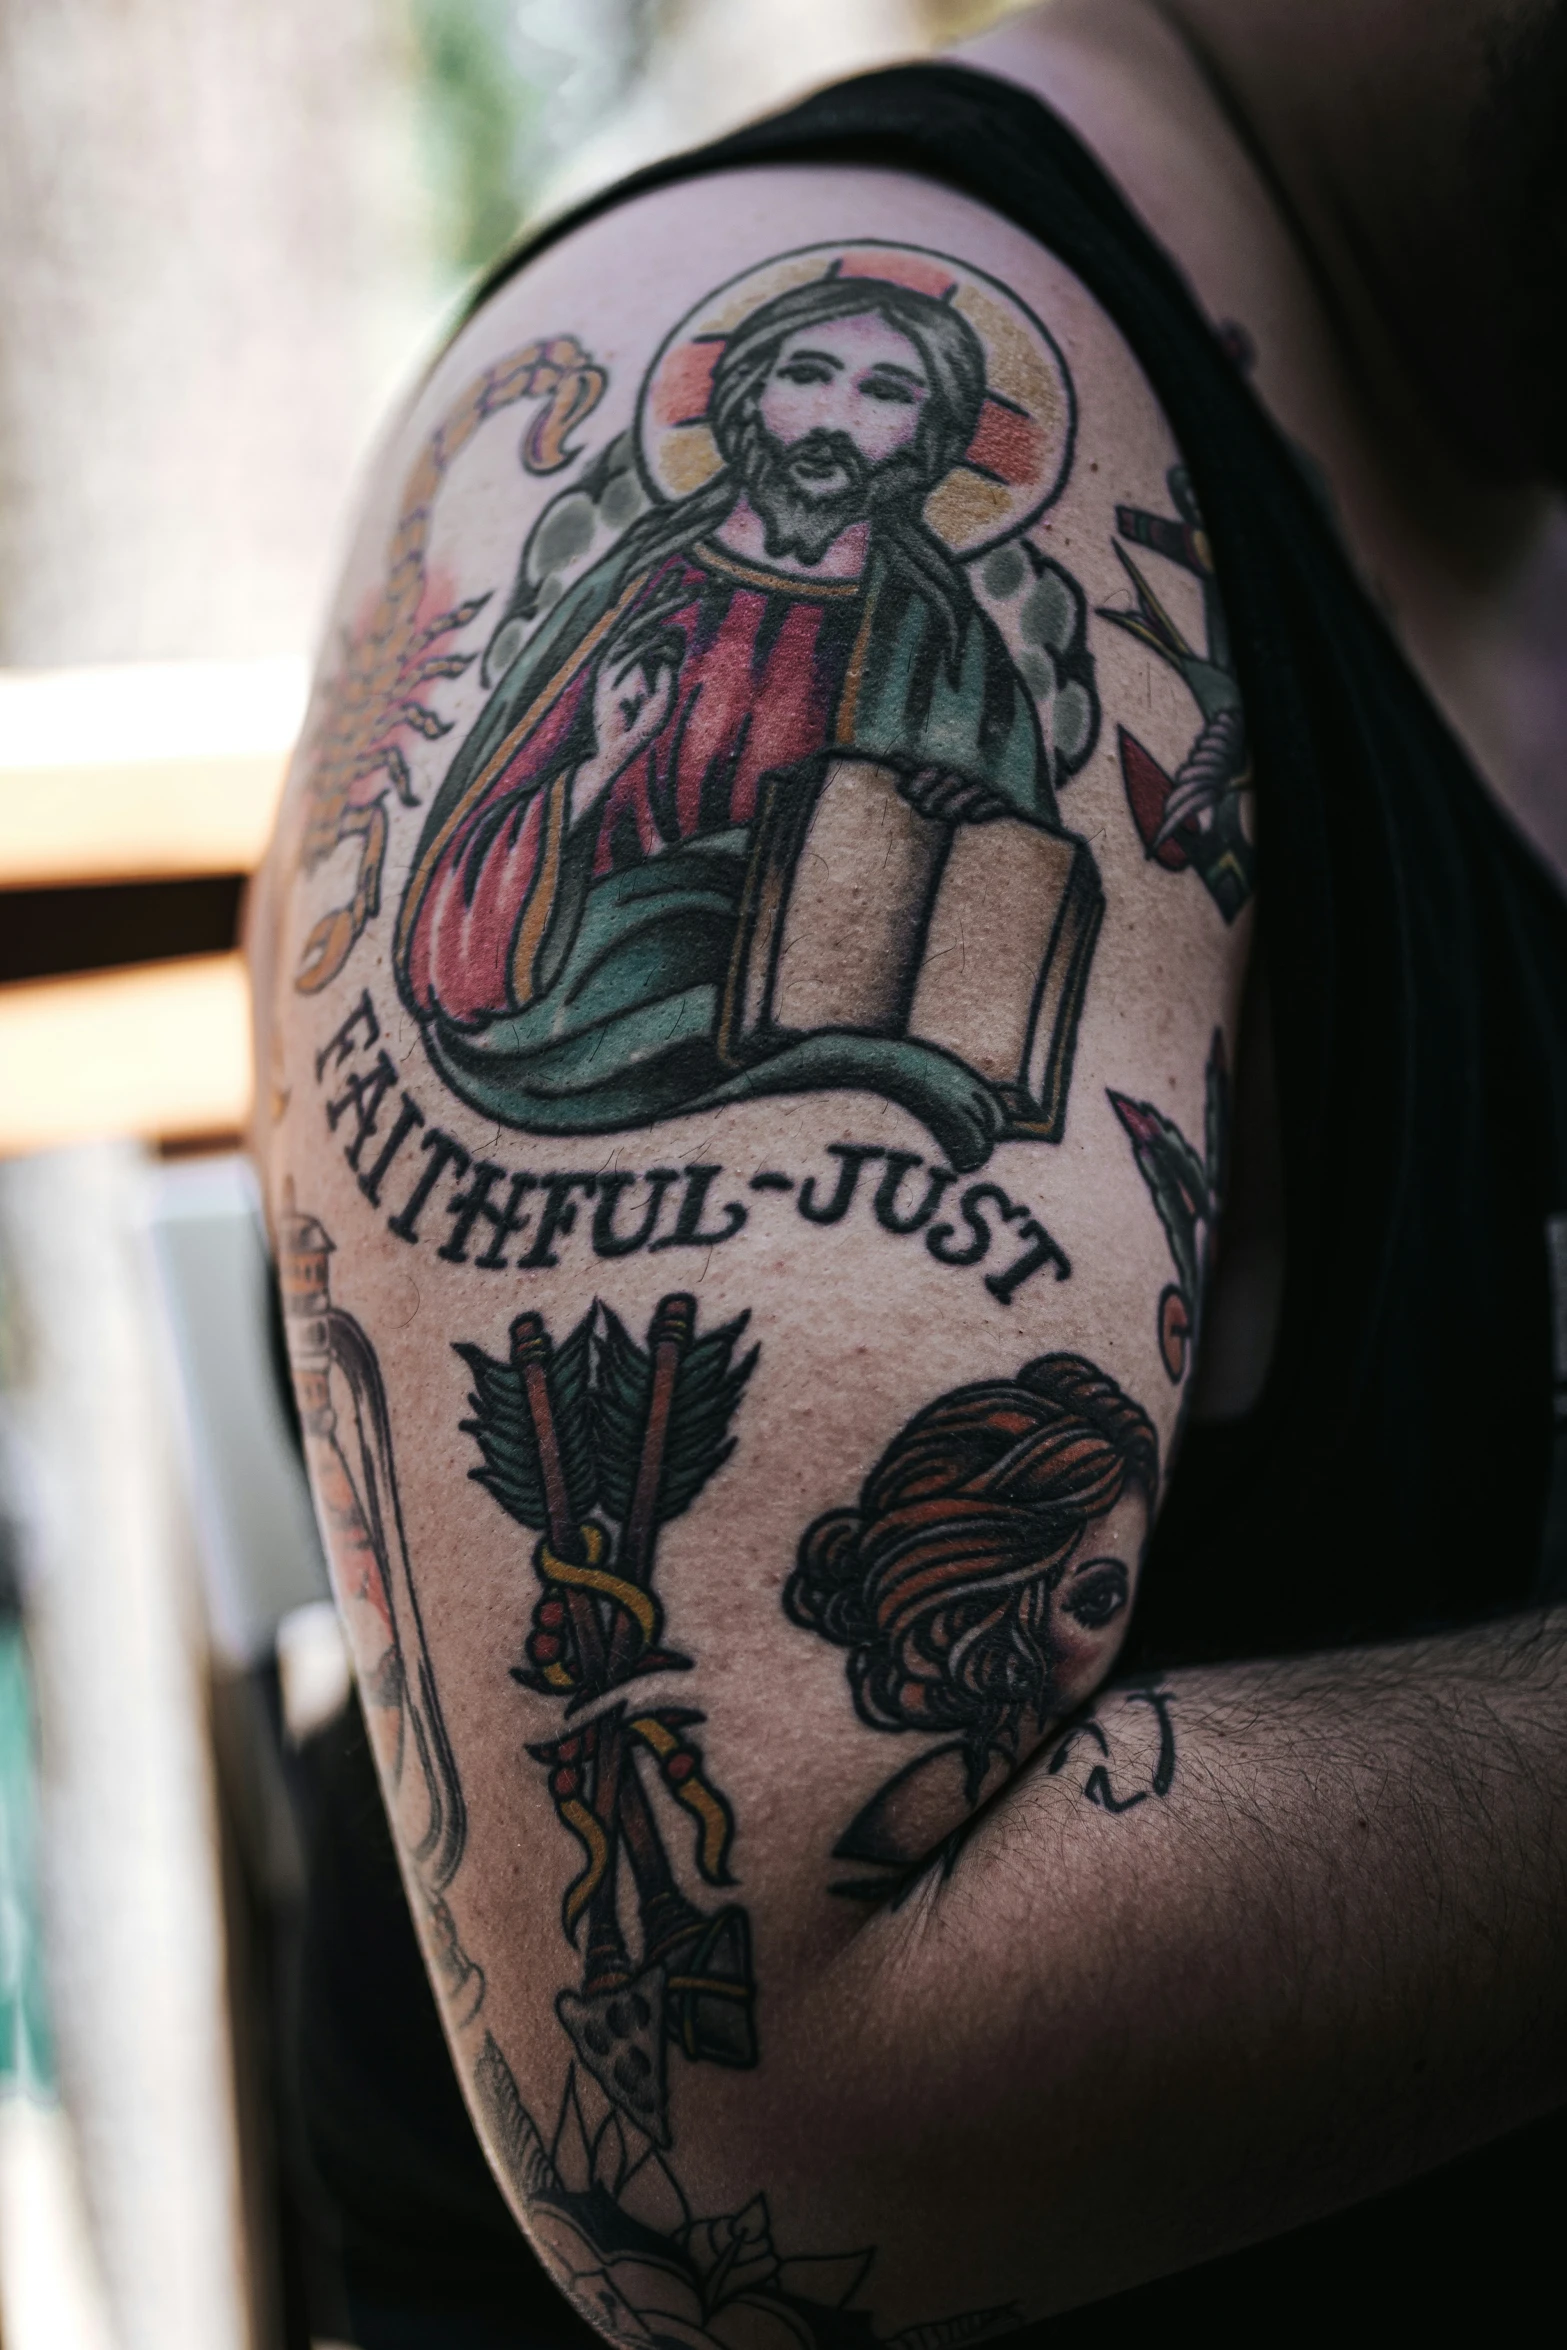 a close up of a person wearing a religious tattoo